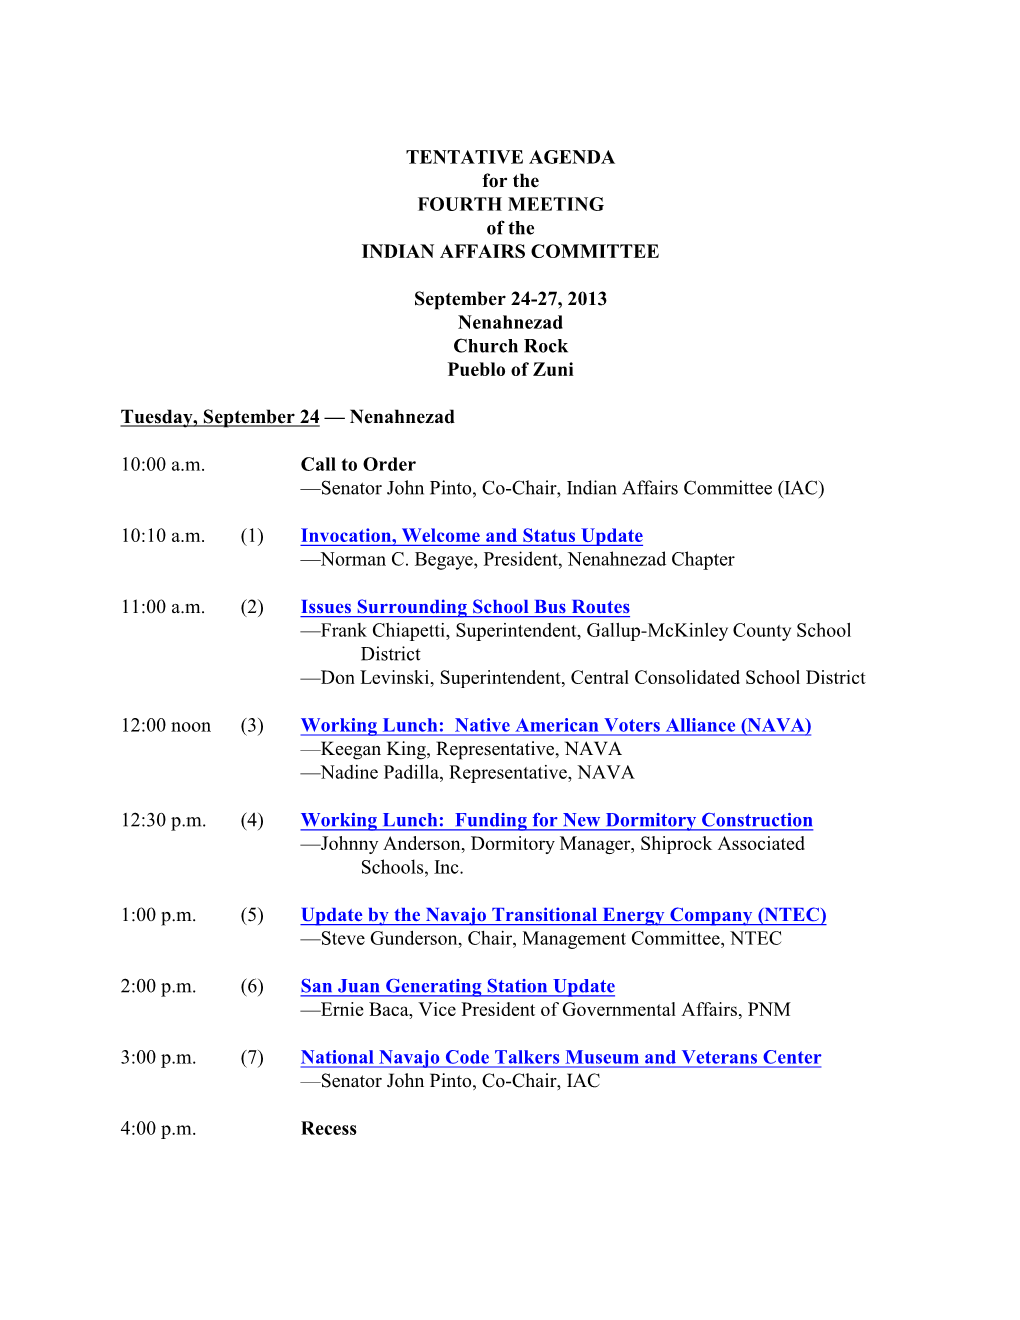 TENTATIVE AGENDA for the FOURTH MEETING of the INDIAN AFFAIRS COMMITTEE